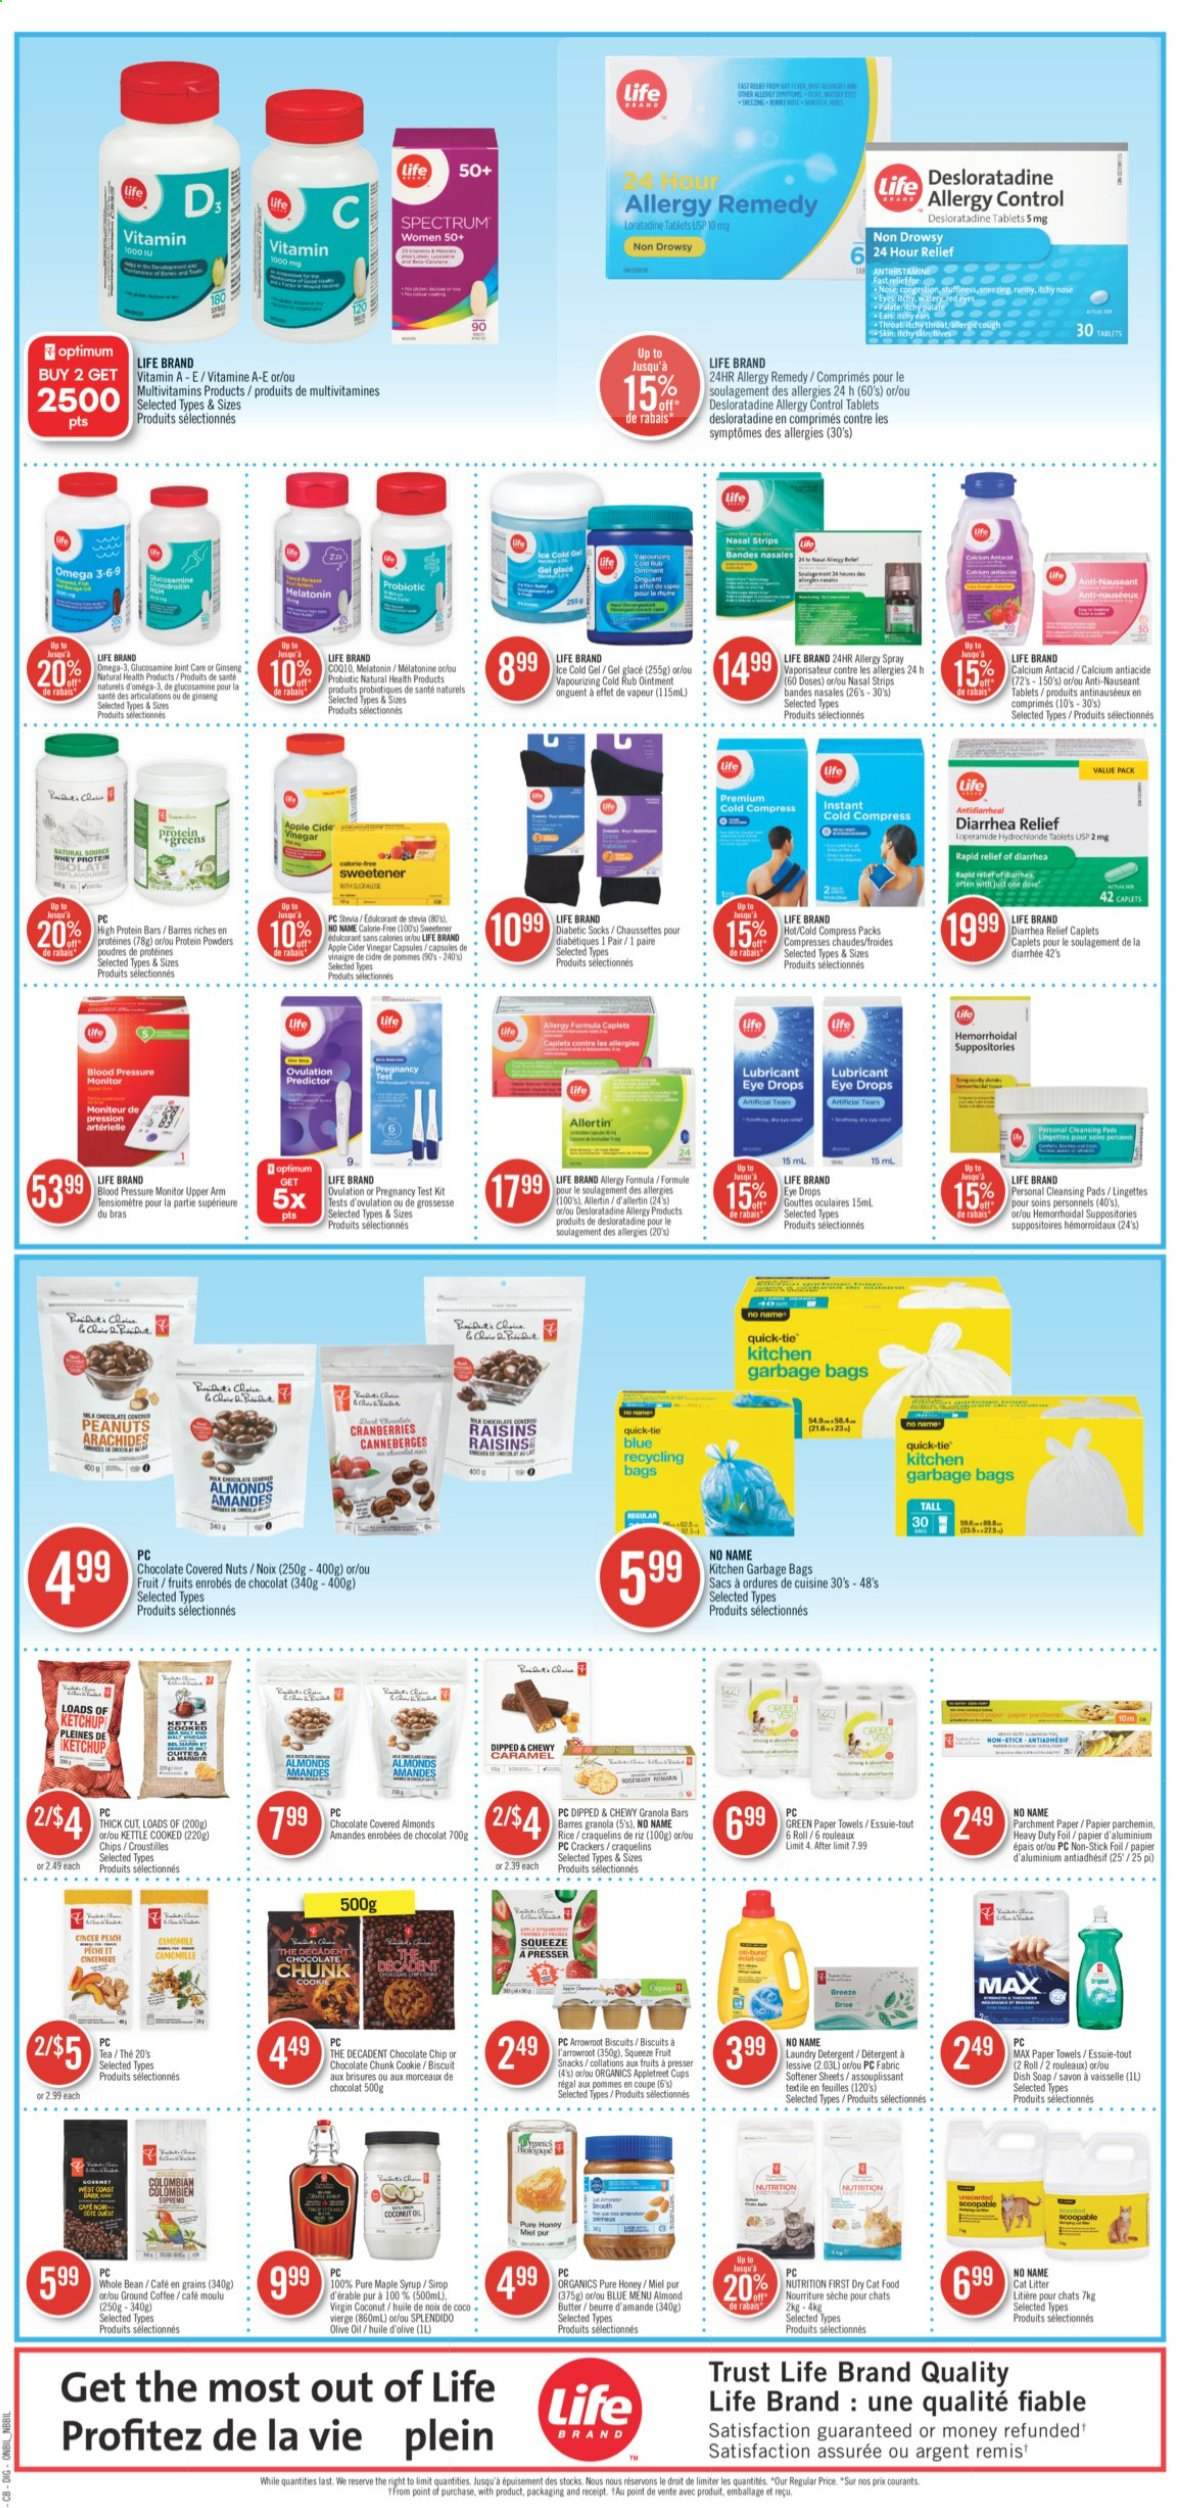 thumbnail - Shoppers Drug Mart Flyer - June 26, 2021 - July 02, 2021 - Sales products - crackers, biscuit, fruit snack, stevia, sweetener, protein bar, granola bar, rice, caramel, apple cider vinegar, olive oil, oil, maple syrup, honey, syrup, almonds, peanuts, dried fruit, tea, coffee, ground coffee, ointment, kitchen towels, paper towels, fabric softener, laundry detergent, soap, lubricant, Trust, bag, pressure monitor, socks, glucosamine, Melatonin, multivitamin, Omega-3, ginseng, eye drops, Spectrum, Antacid, bra, raisins, chips. Page 14.